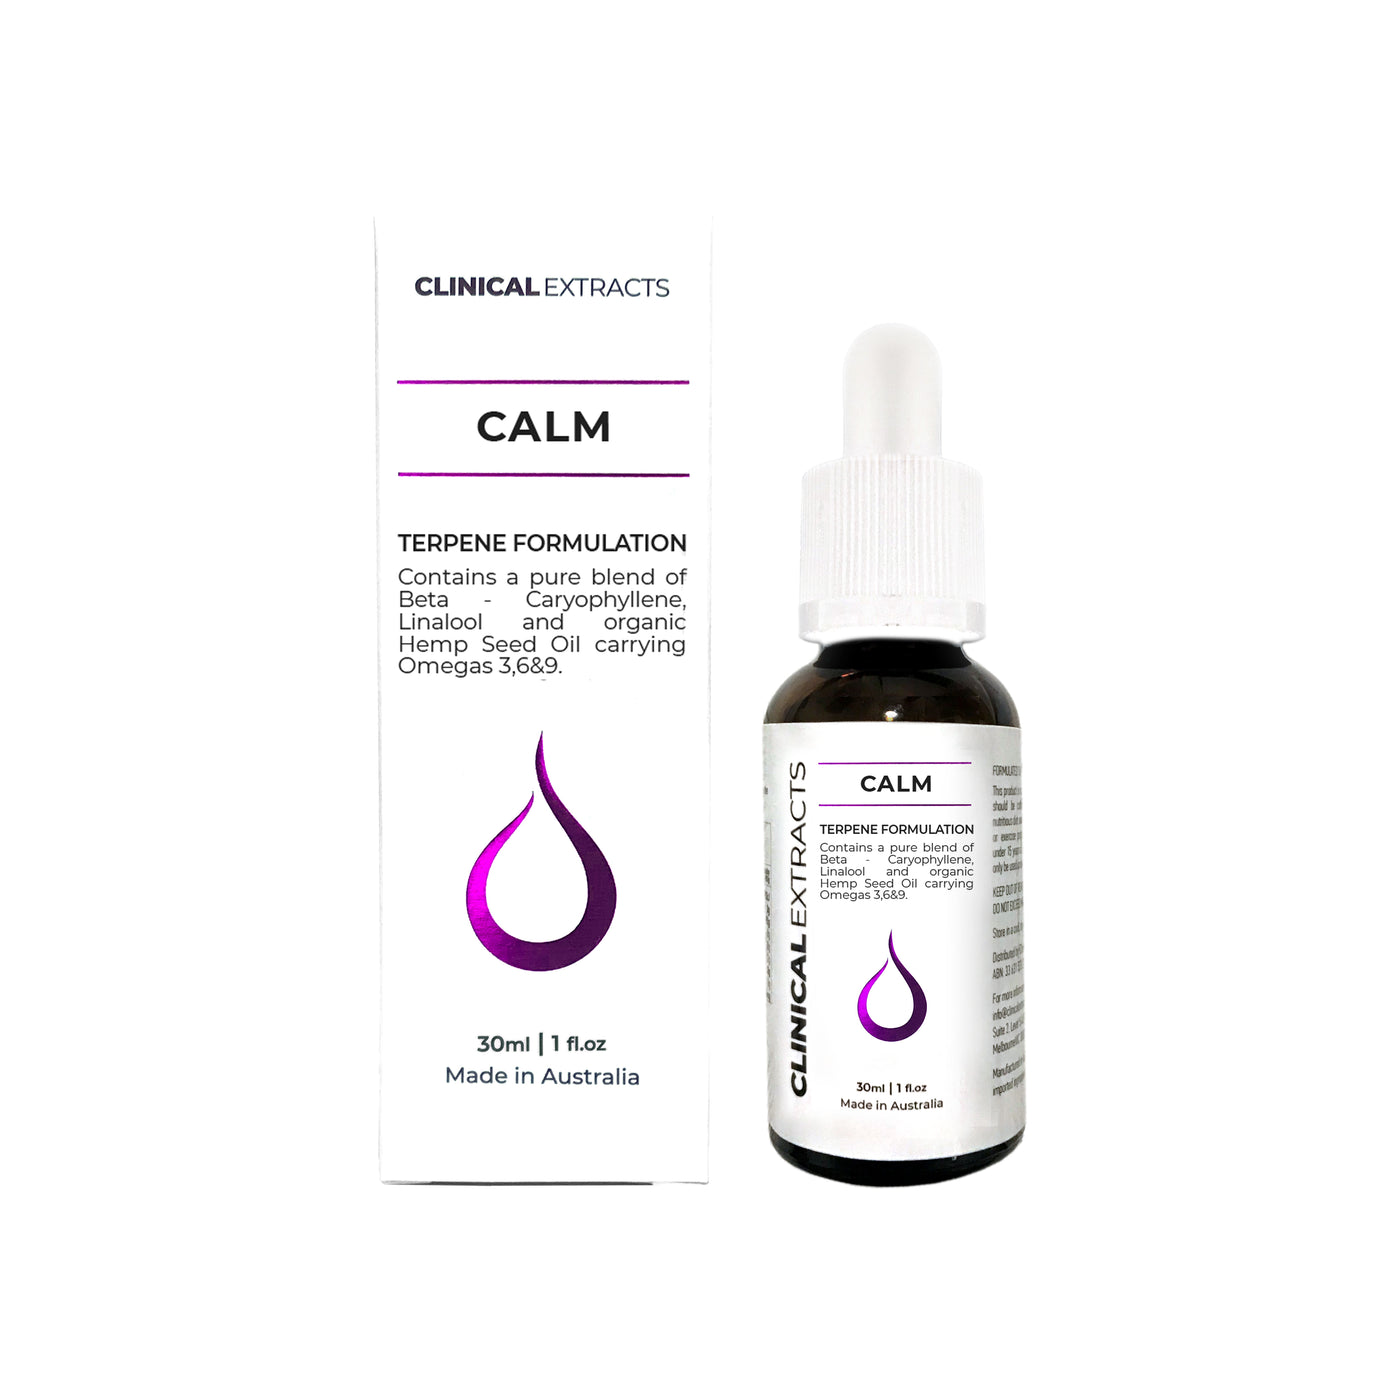 Clinical Extracts Terpene Formulation Calm 30mL